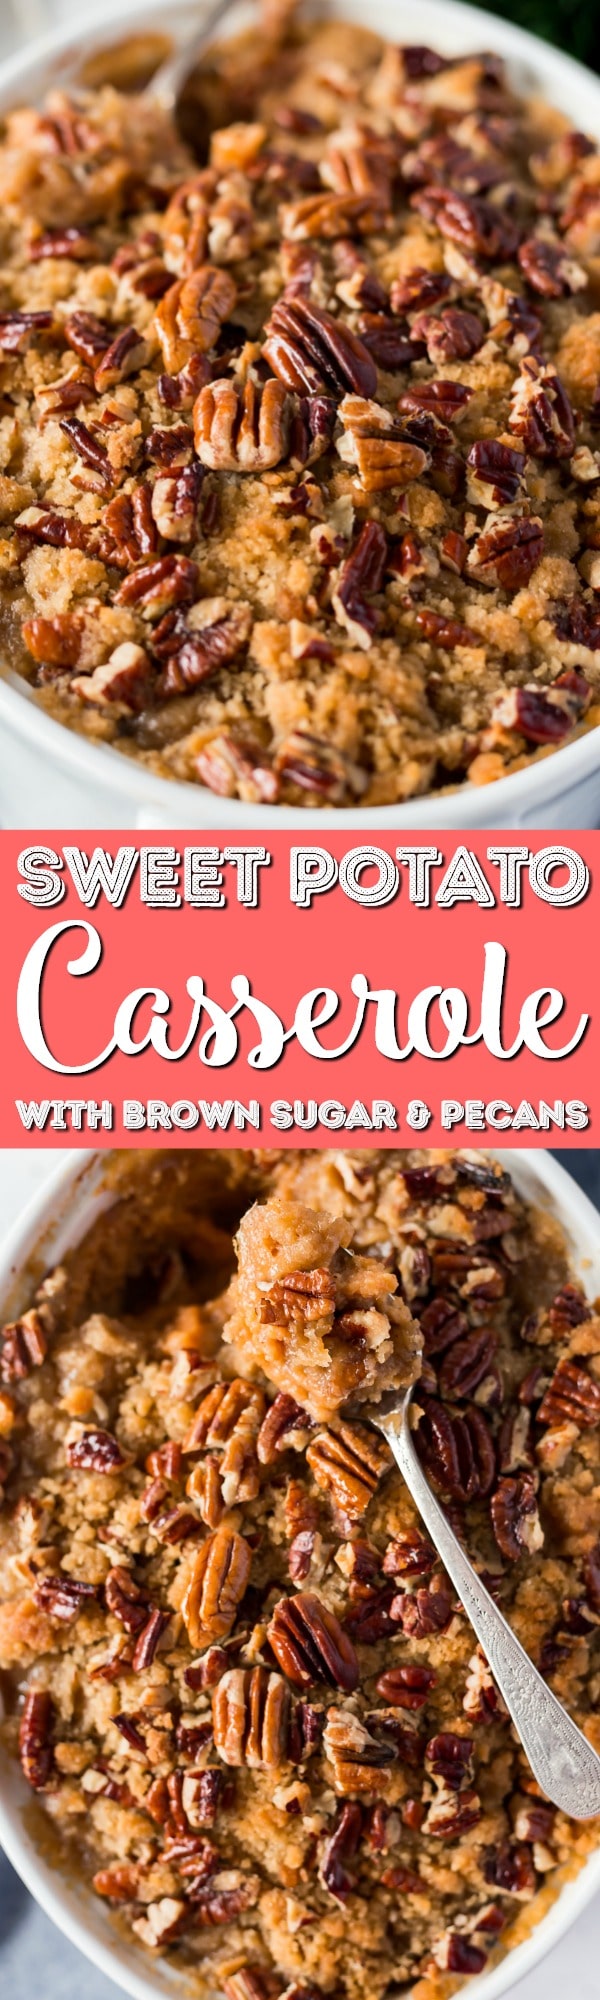 This Sweet Potato Casserole is loaded with rich and cozy flavors of brown sugar, cinnamon, and nutmeg. It's laced with butter and crunchy pecans, the perfect holiday side dish! via @sugarandsoulco